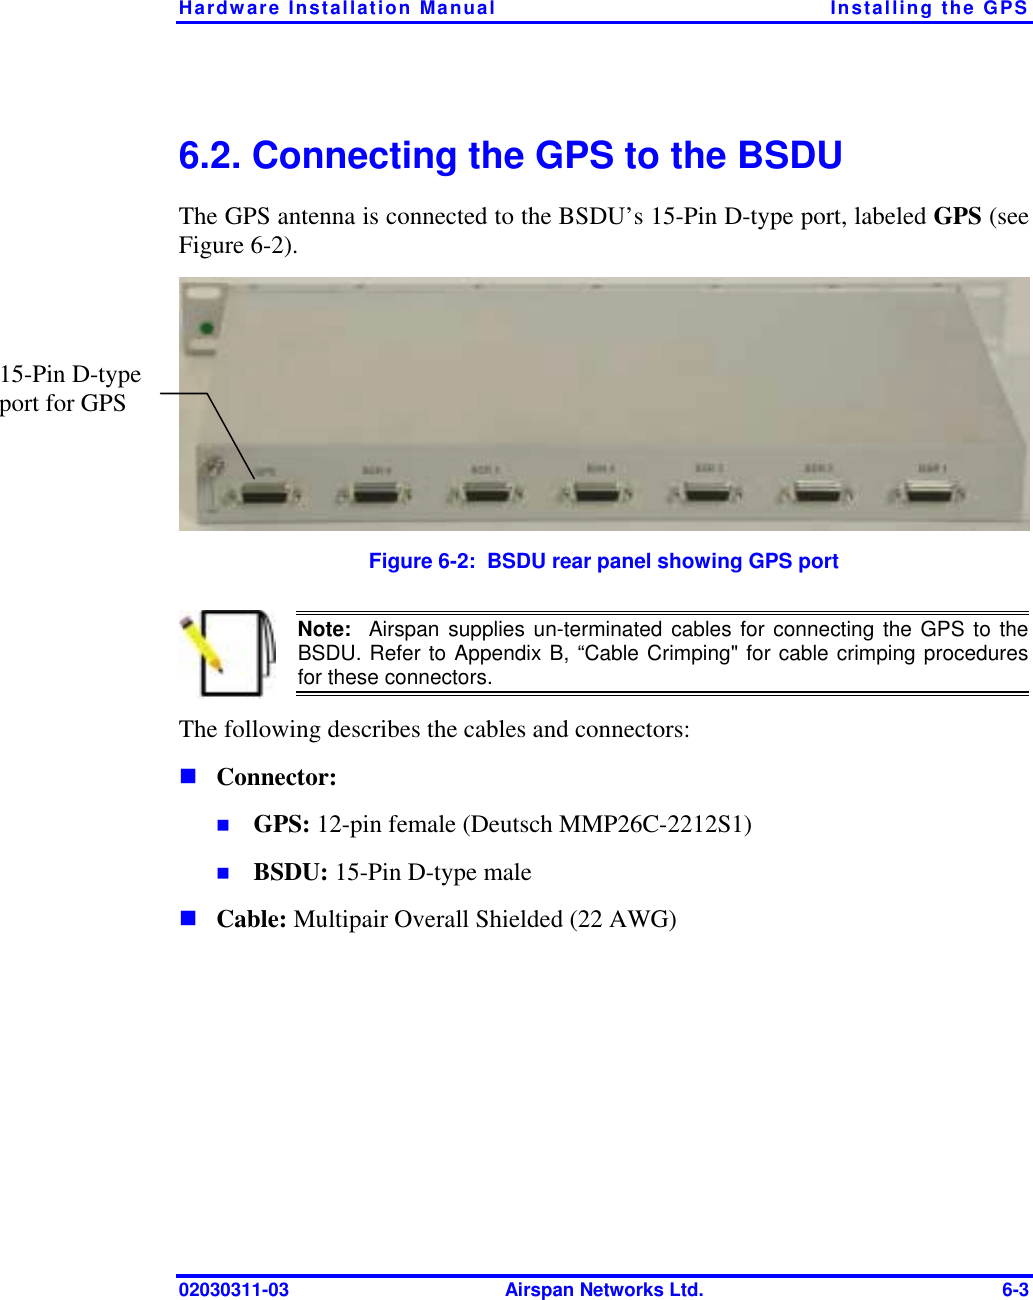 Hardware Installation Manual  Installing the GPS 02030311-03  Airspan Networks Ltd.  6-3 6.2. Connecting the GPS to the BSDU The GPS antenna is connected to the BSDU’s 15-Pin D-type port, labeled GPS (see Figure  6-2).   Figure  6-2:  BSDU rear panel showing GPS port  Note:  Airspan supplies un-terminated cables for connecting the GPS to the BSDU. Refer to Appendix B, “Cable Crimping&quot; for cable crimping proceduresfor these connectors. The following describes the cables and connectors: ! Connector:  !  GPS: 12-pin female (Deutsch MMP26C-2212S1) !  BSDU: 15-Pin D-type male ! Cable: Multipair Overall Shielded (22 AWG) 15-Pin D-type port for GPS  